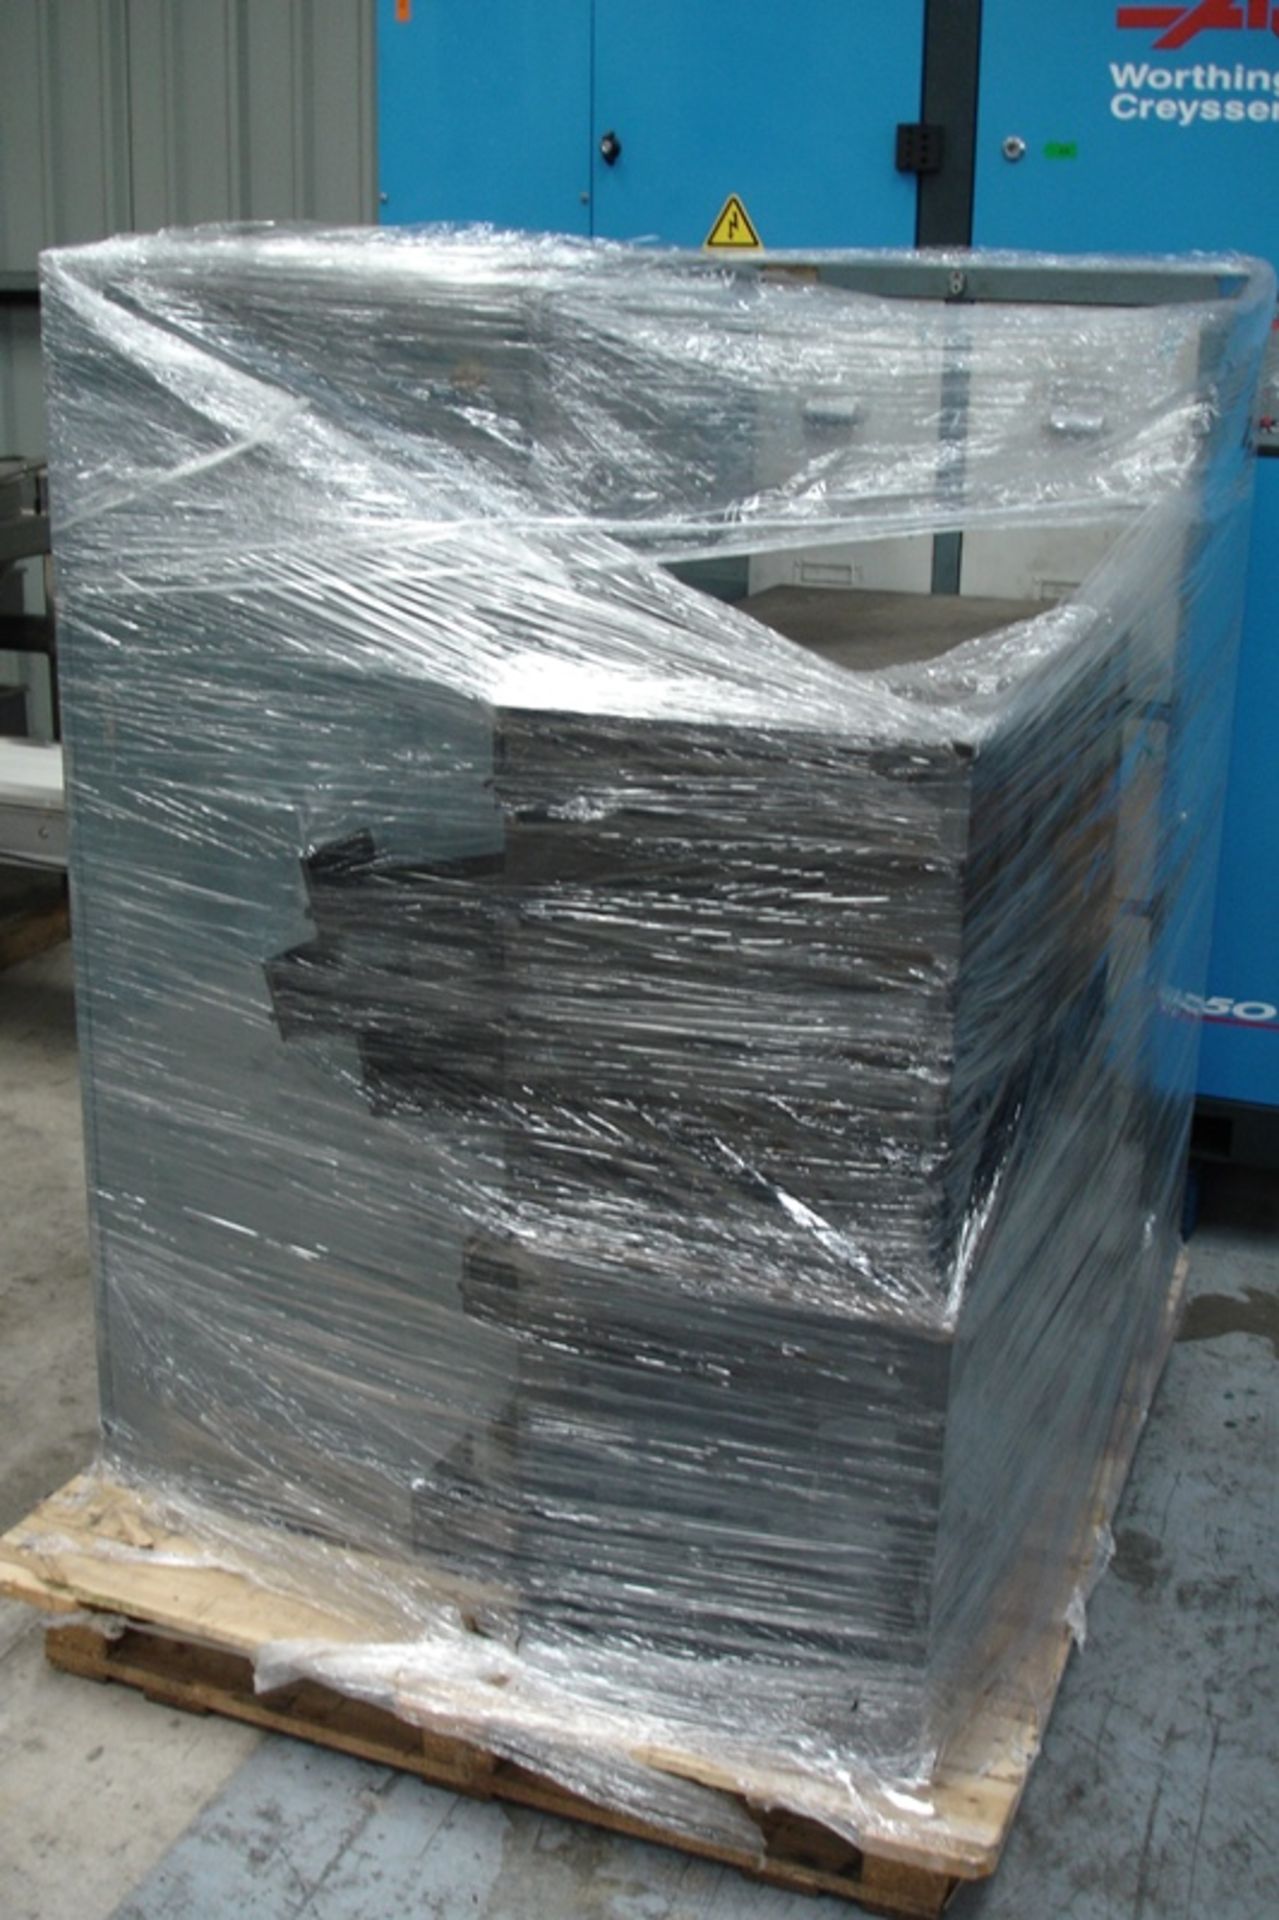 Pallet of Filing Cabinets